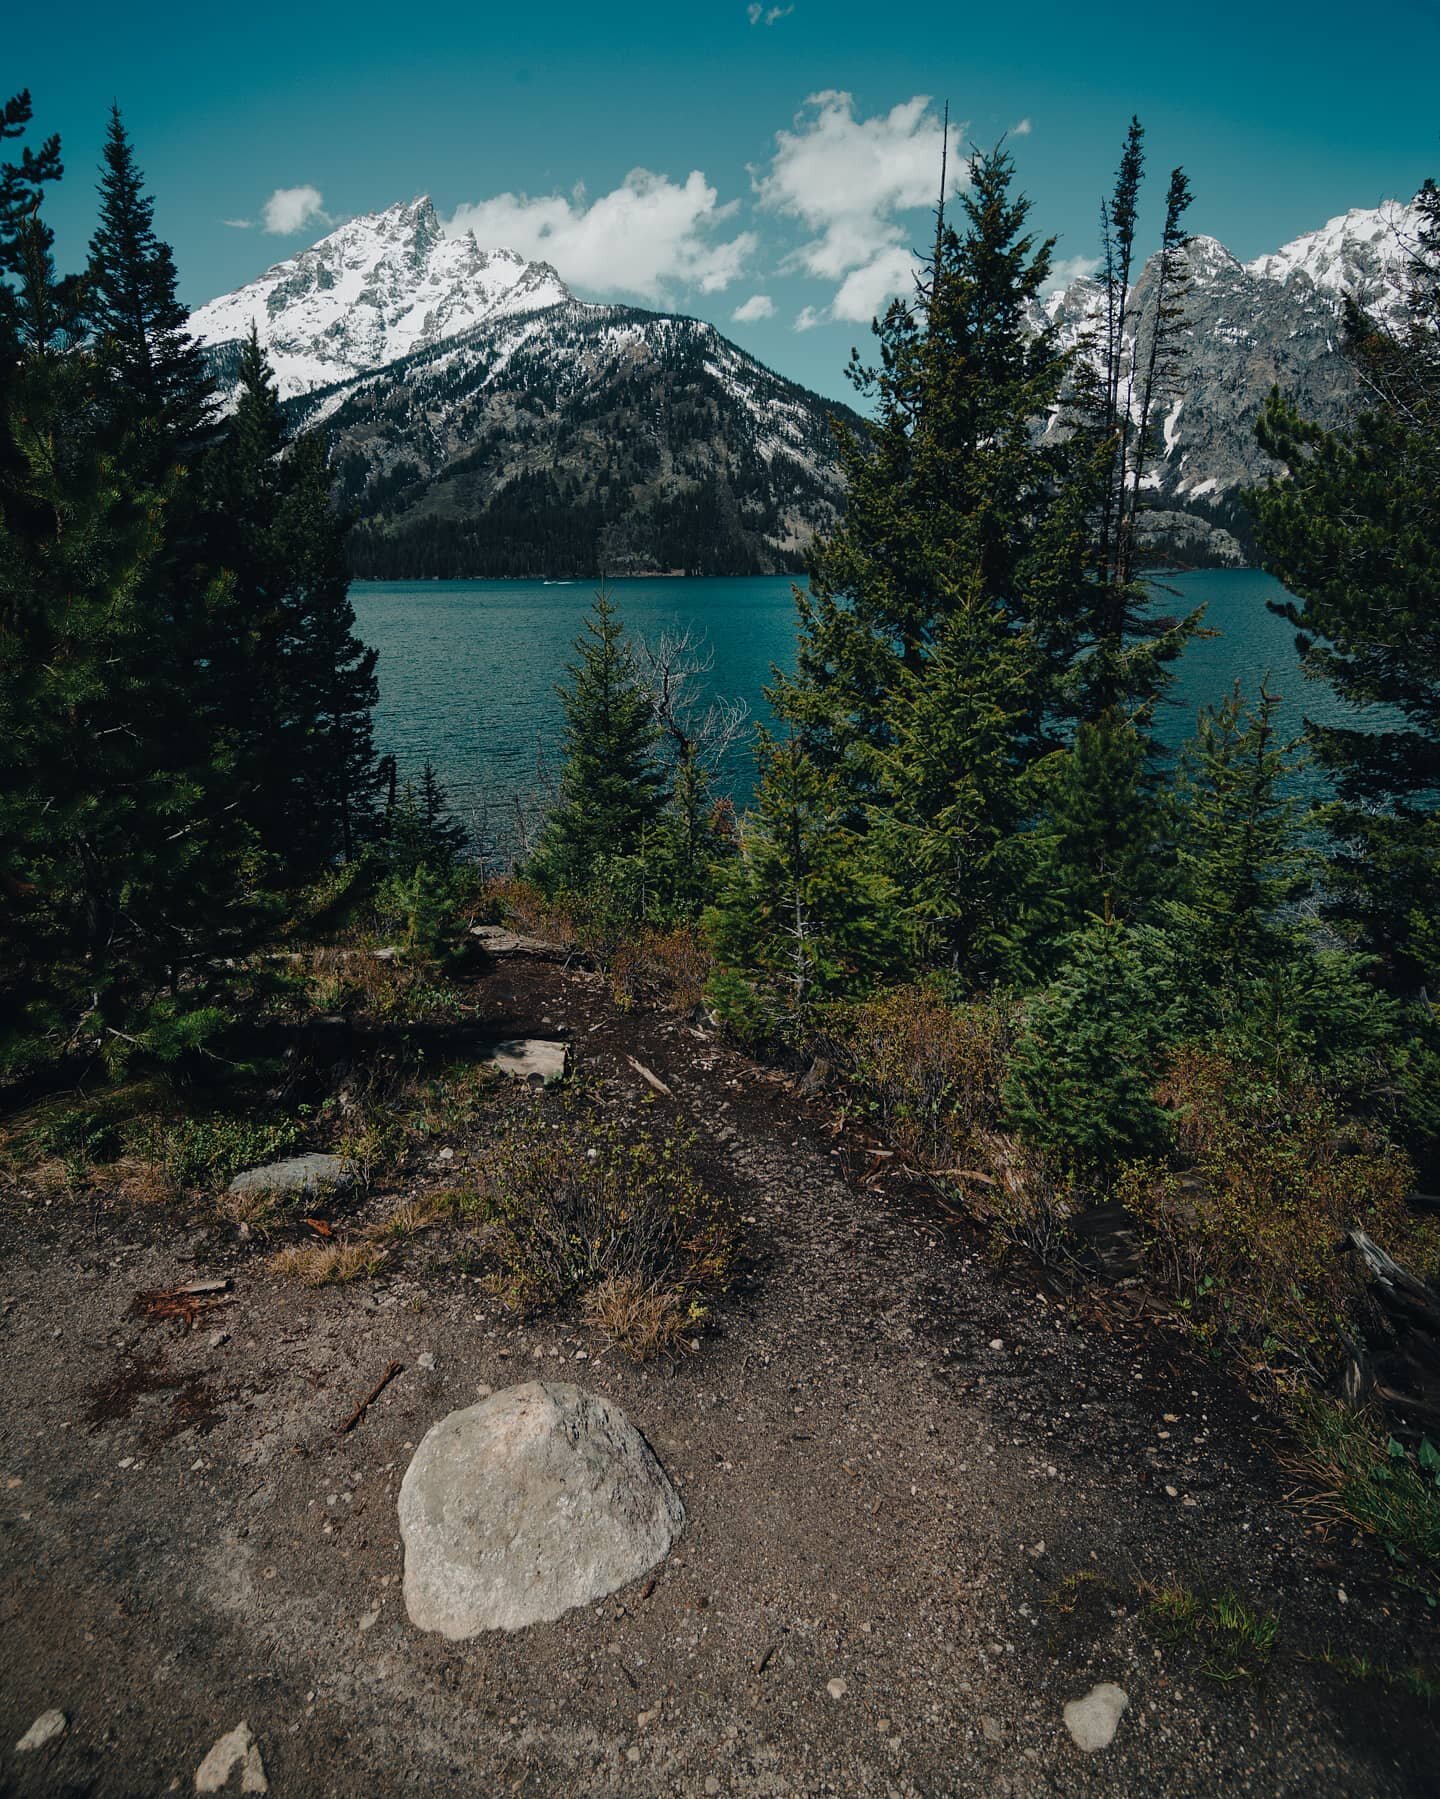 Here's a shot from the home around @grandtetonnps 's Jenny Lake. It's a beautiful sunny day here, but what you can't see is that a couple hours later, a monsoon-like rain (feat. Some Hail) pounded us on the last leg of the  hike. So glad I got to see